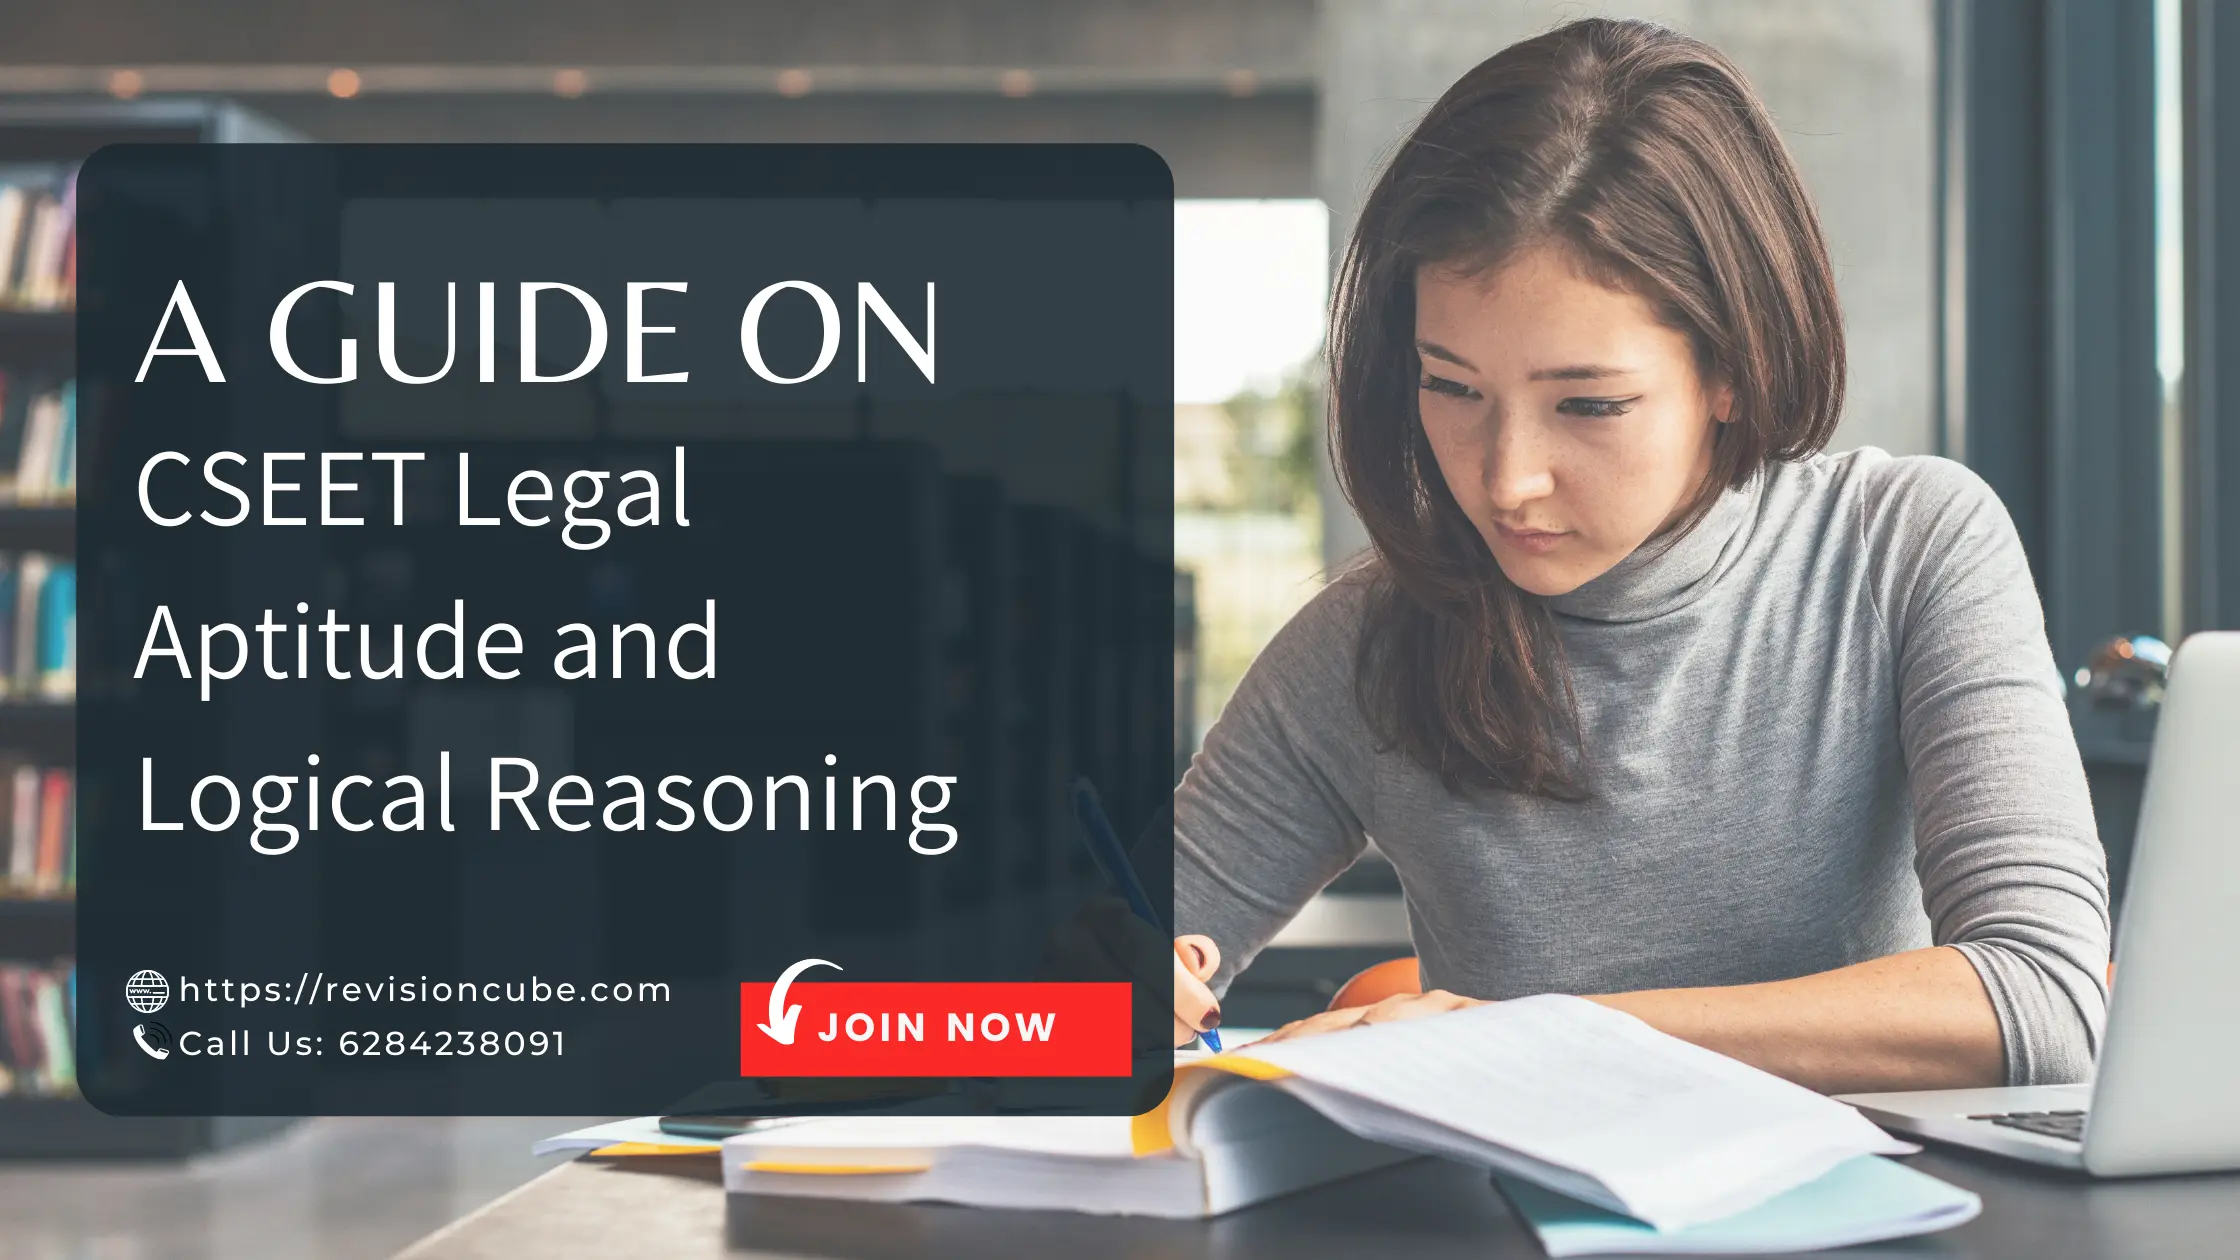 A Guide on CSEET Legal Aptitude & Logical Reasoning for 2022